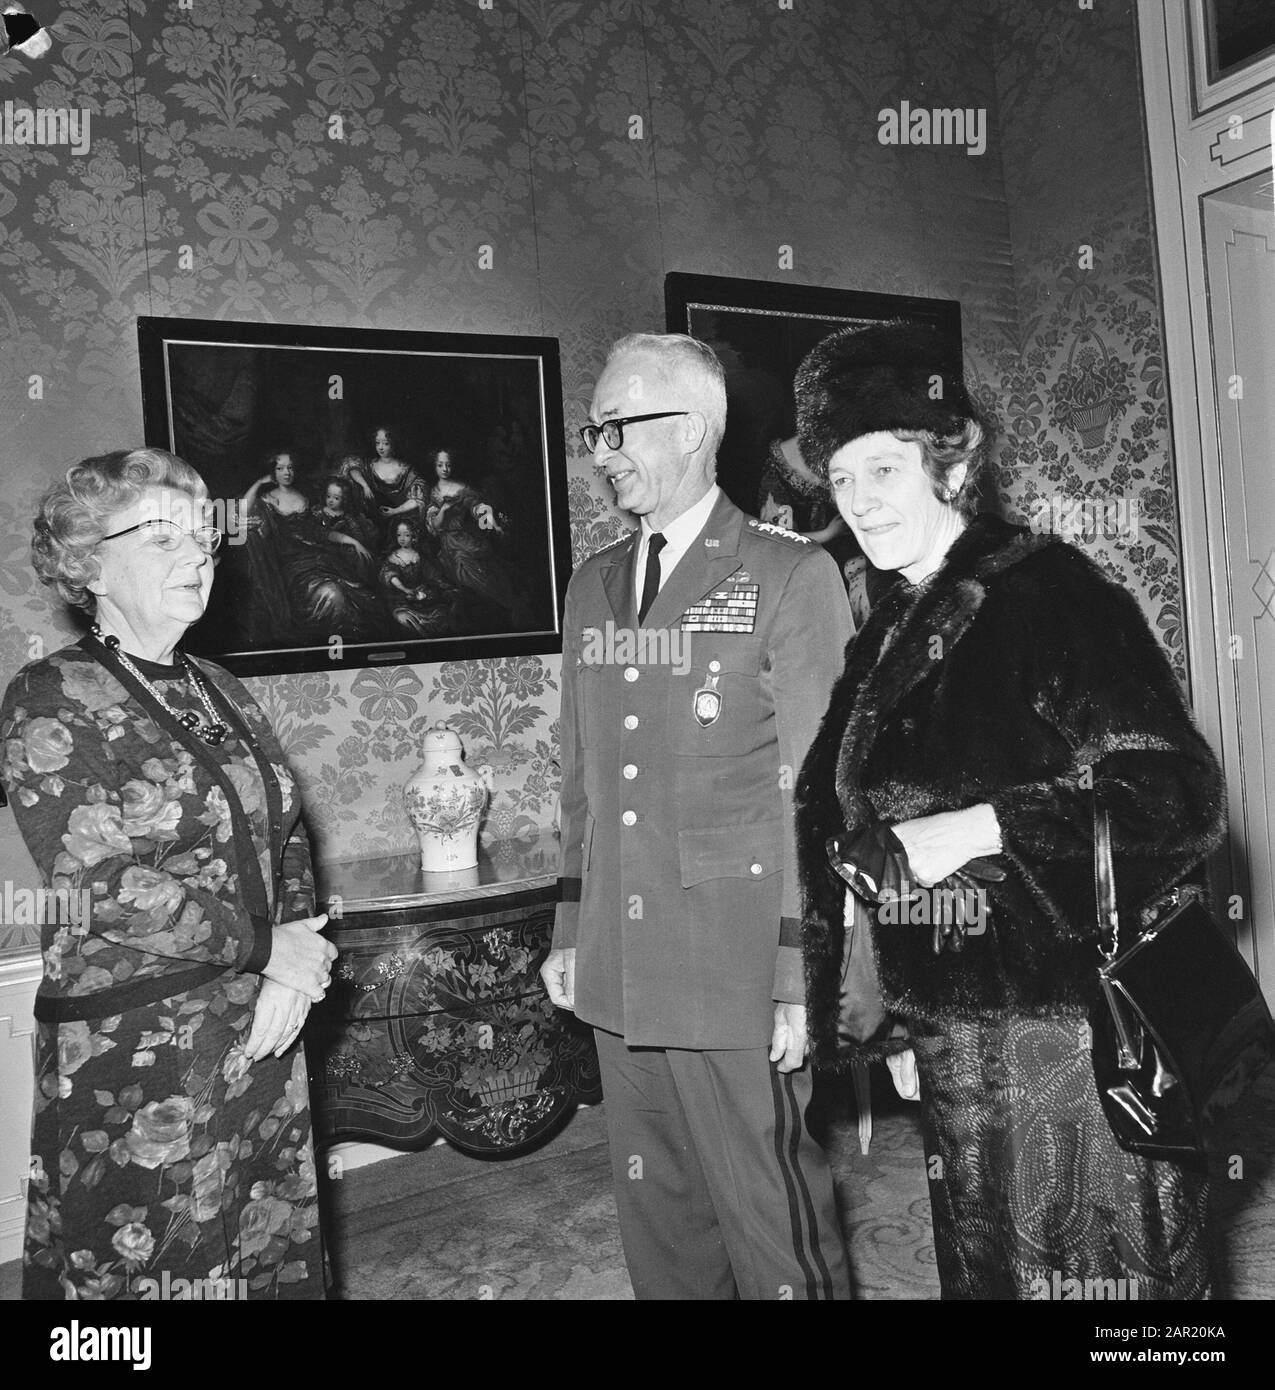 Queen Juliana receives general Goodpaster (commander in chief NATO) and his wife Date: November 18, 1974 Location: The Hague, Zuid-Holland Keywords: generals, queens, paintings Personal name: Goodpaster, Andrew, Juliana (queen Netherlands) Institution name: NATO Stock Photo